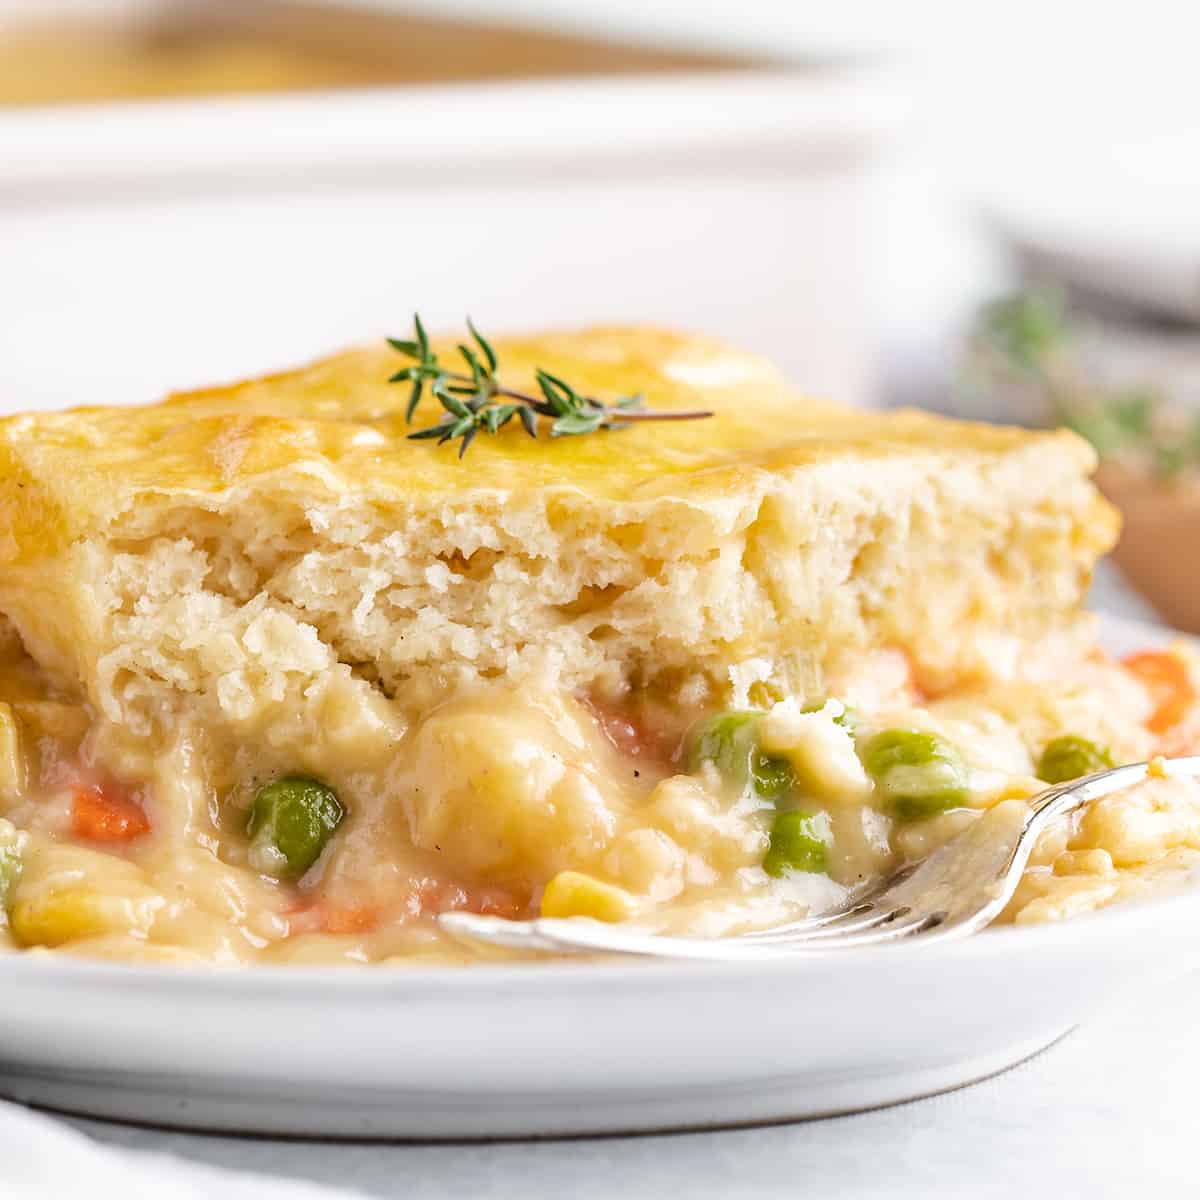 a serving of Vegetable Pot Pie on a plate with a fork